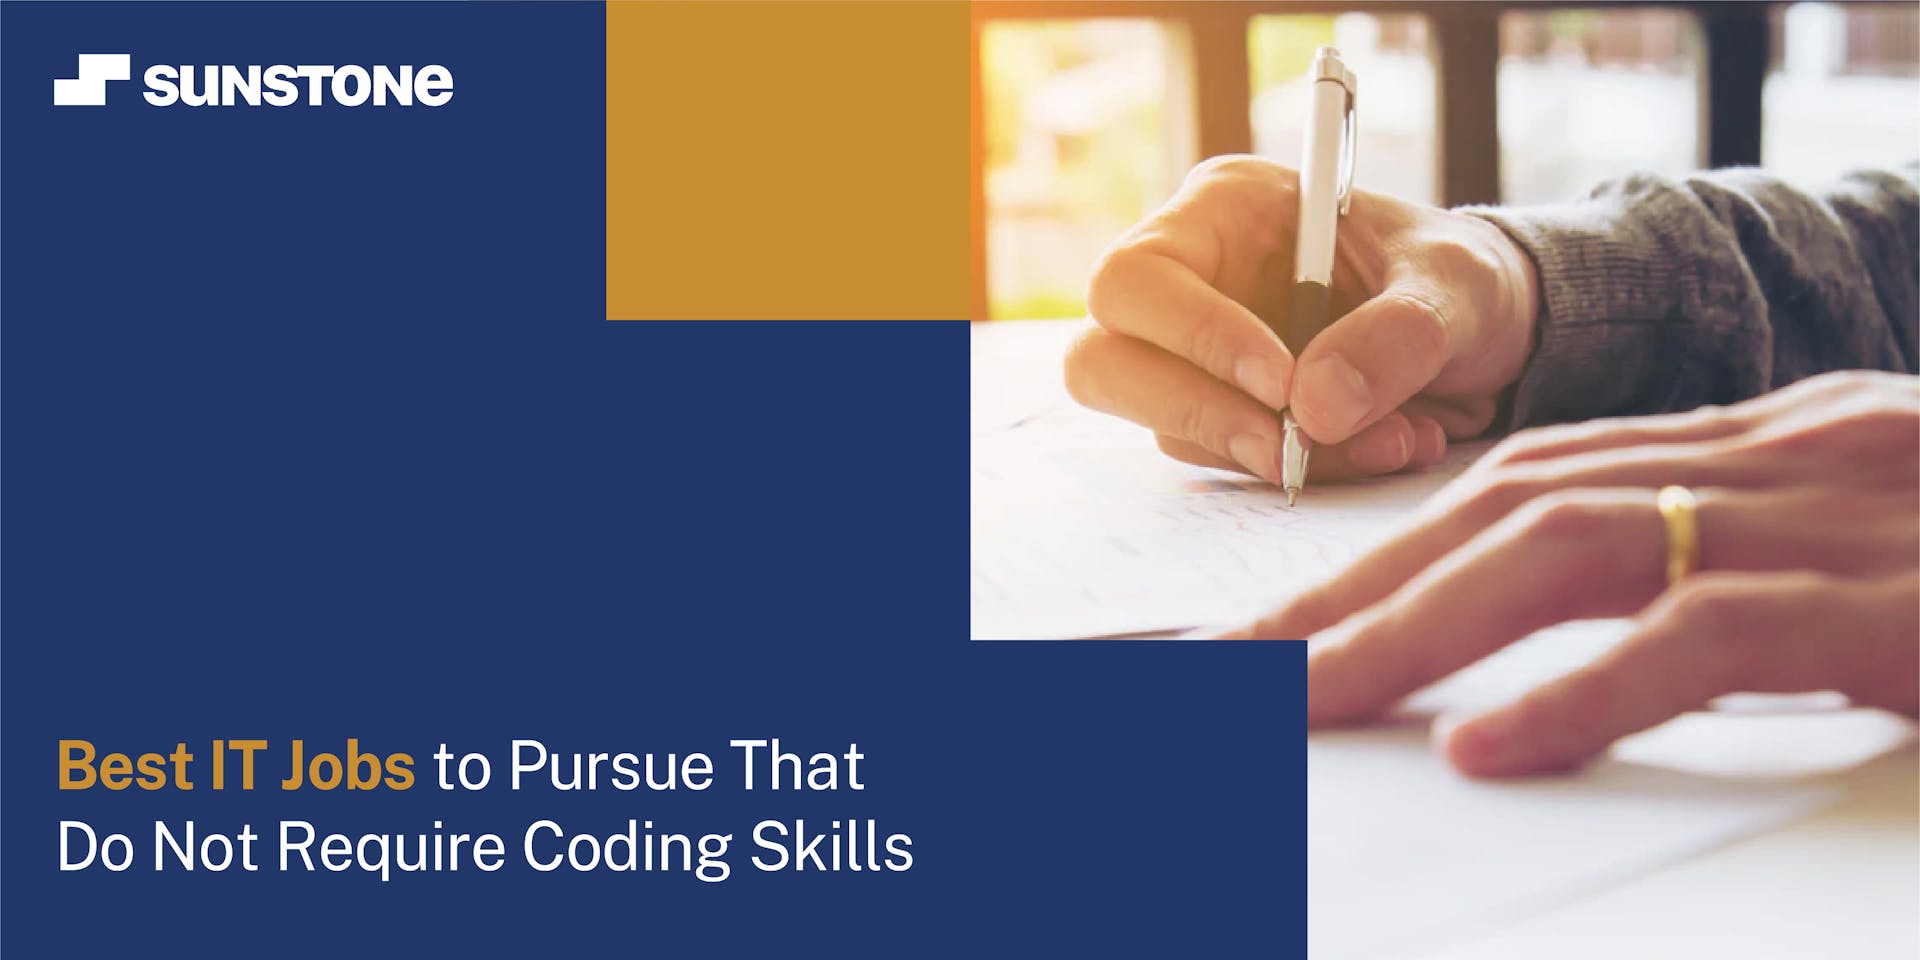 6 Best IT Jobs Without Coding